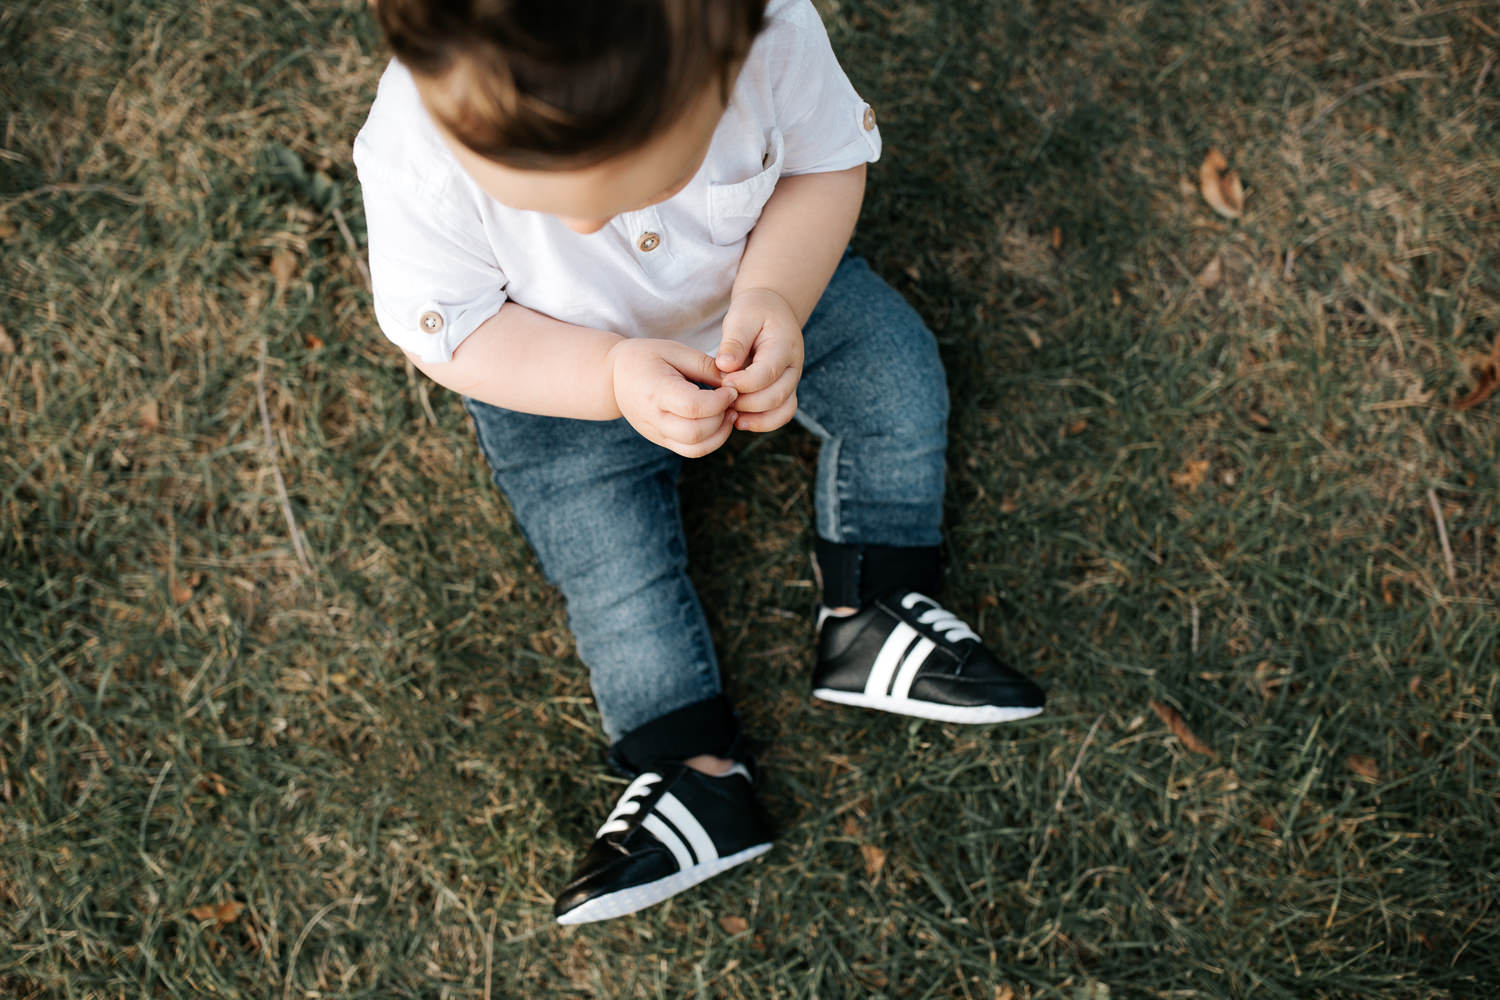 9 month old baby boy wearing white t-shirt, jeans and sneakers sitting on grass at park in front of greenery, close up of clasped hands and feet - GTA Golden Hour Photos